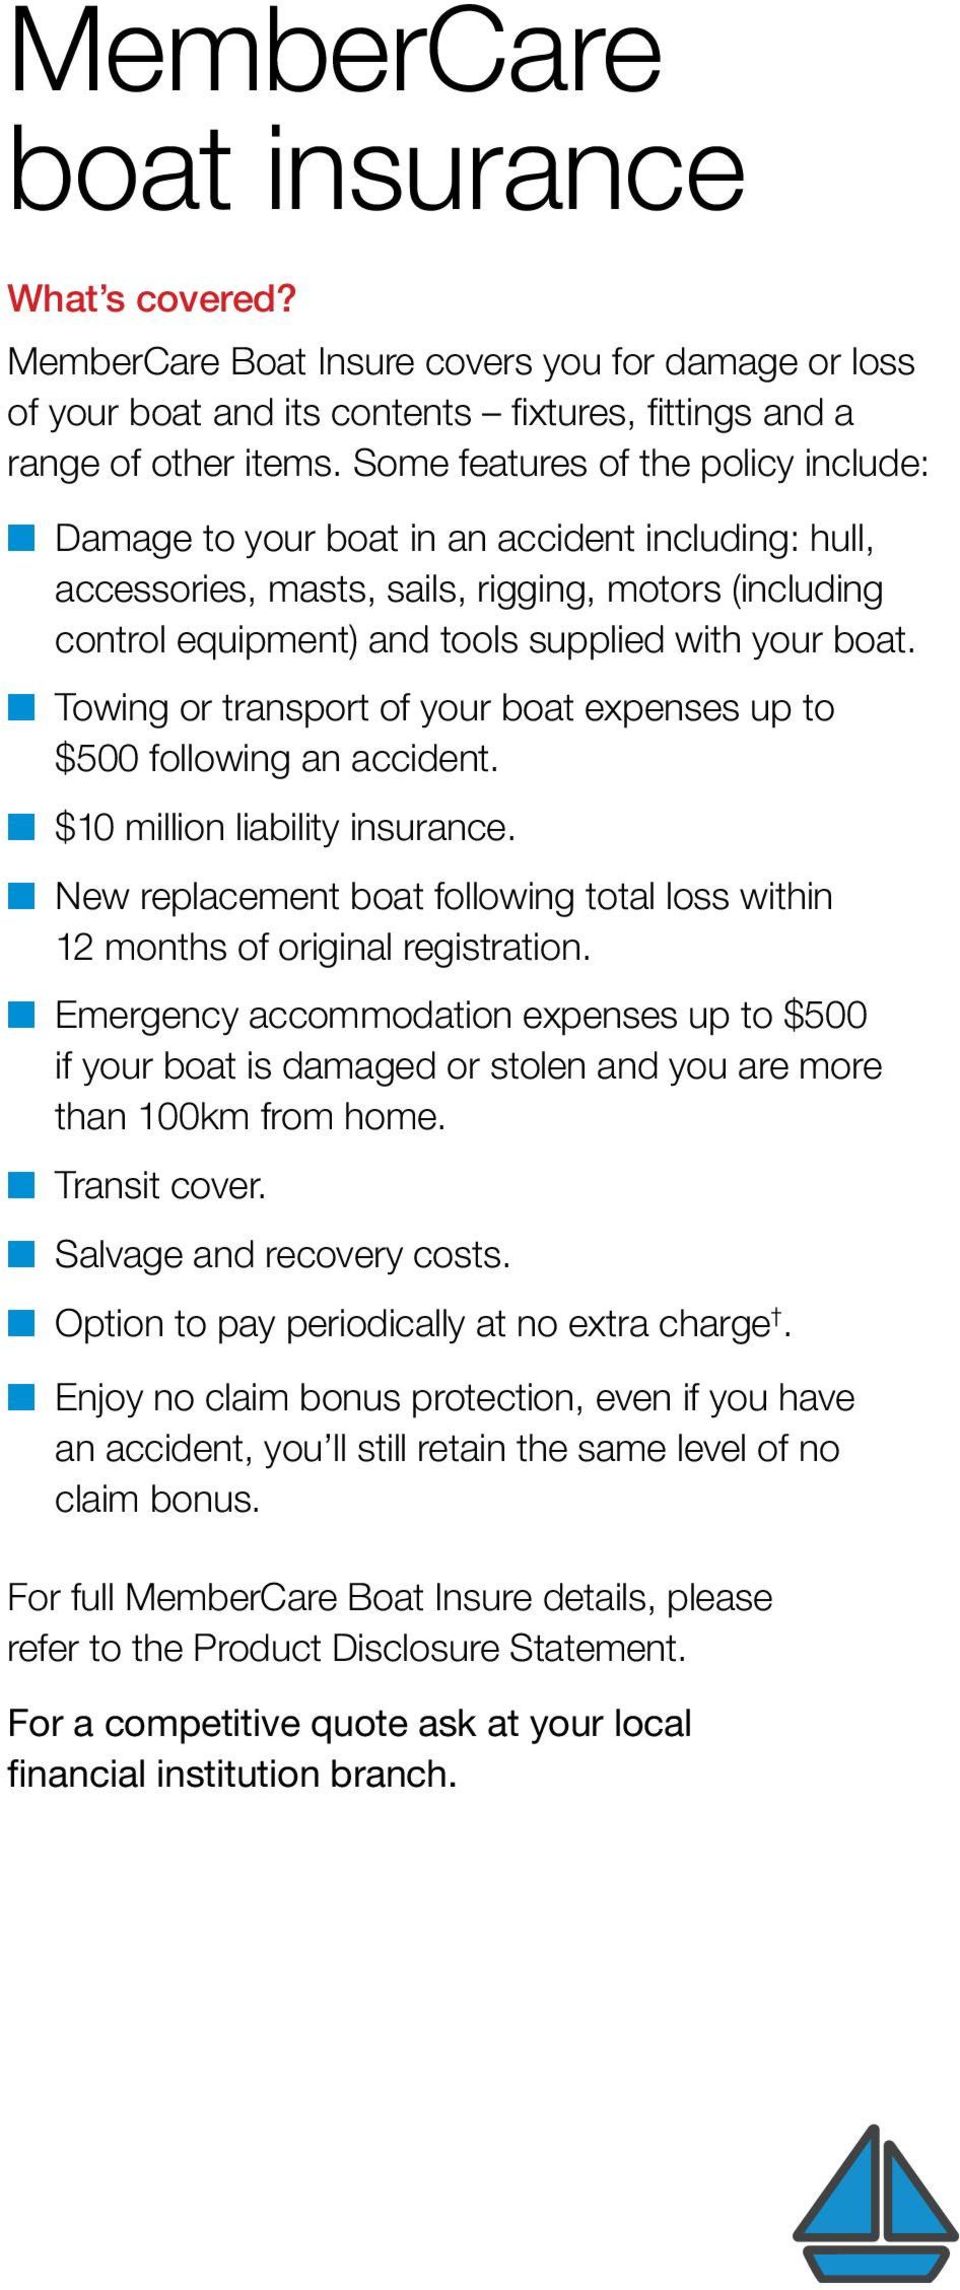 Towing or transport of your boat expenses up to $500 following an accident. $10 million liability insurance. New replacement boat following total loss within 12 months of original registration.